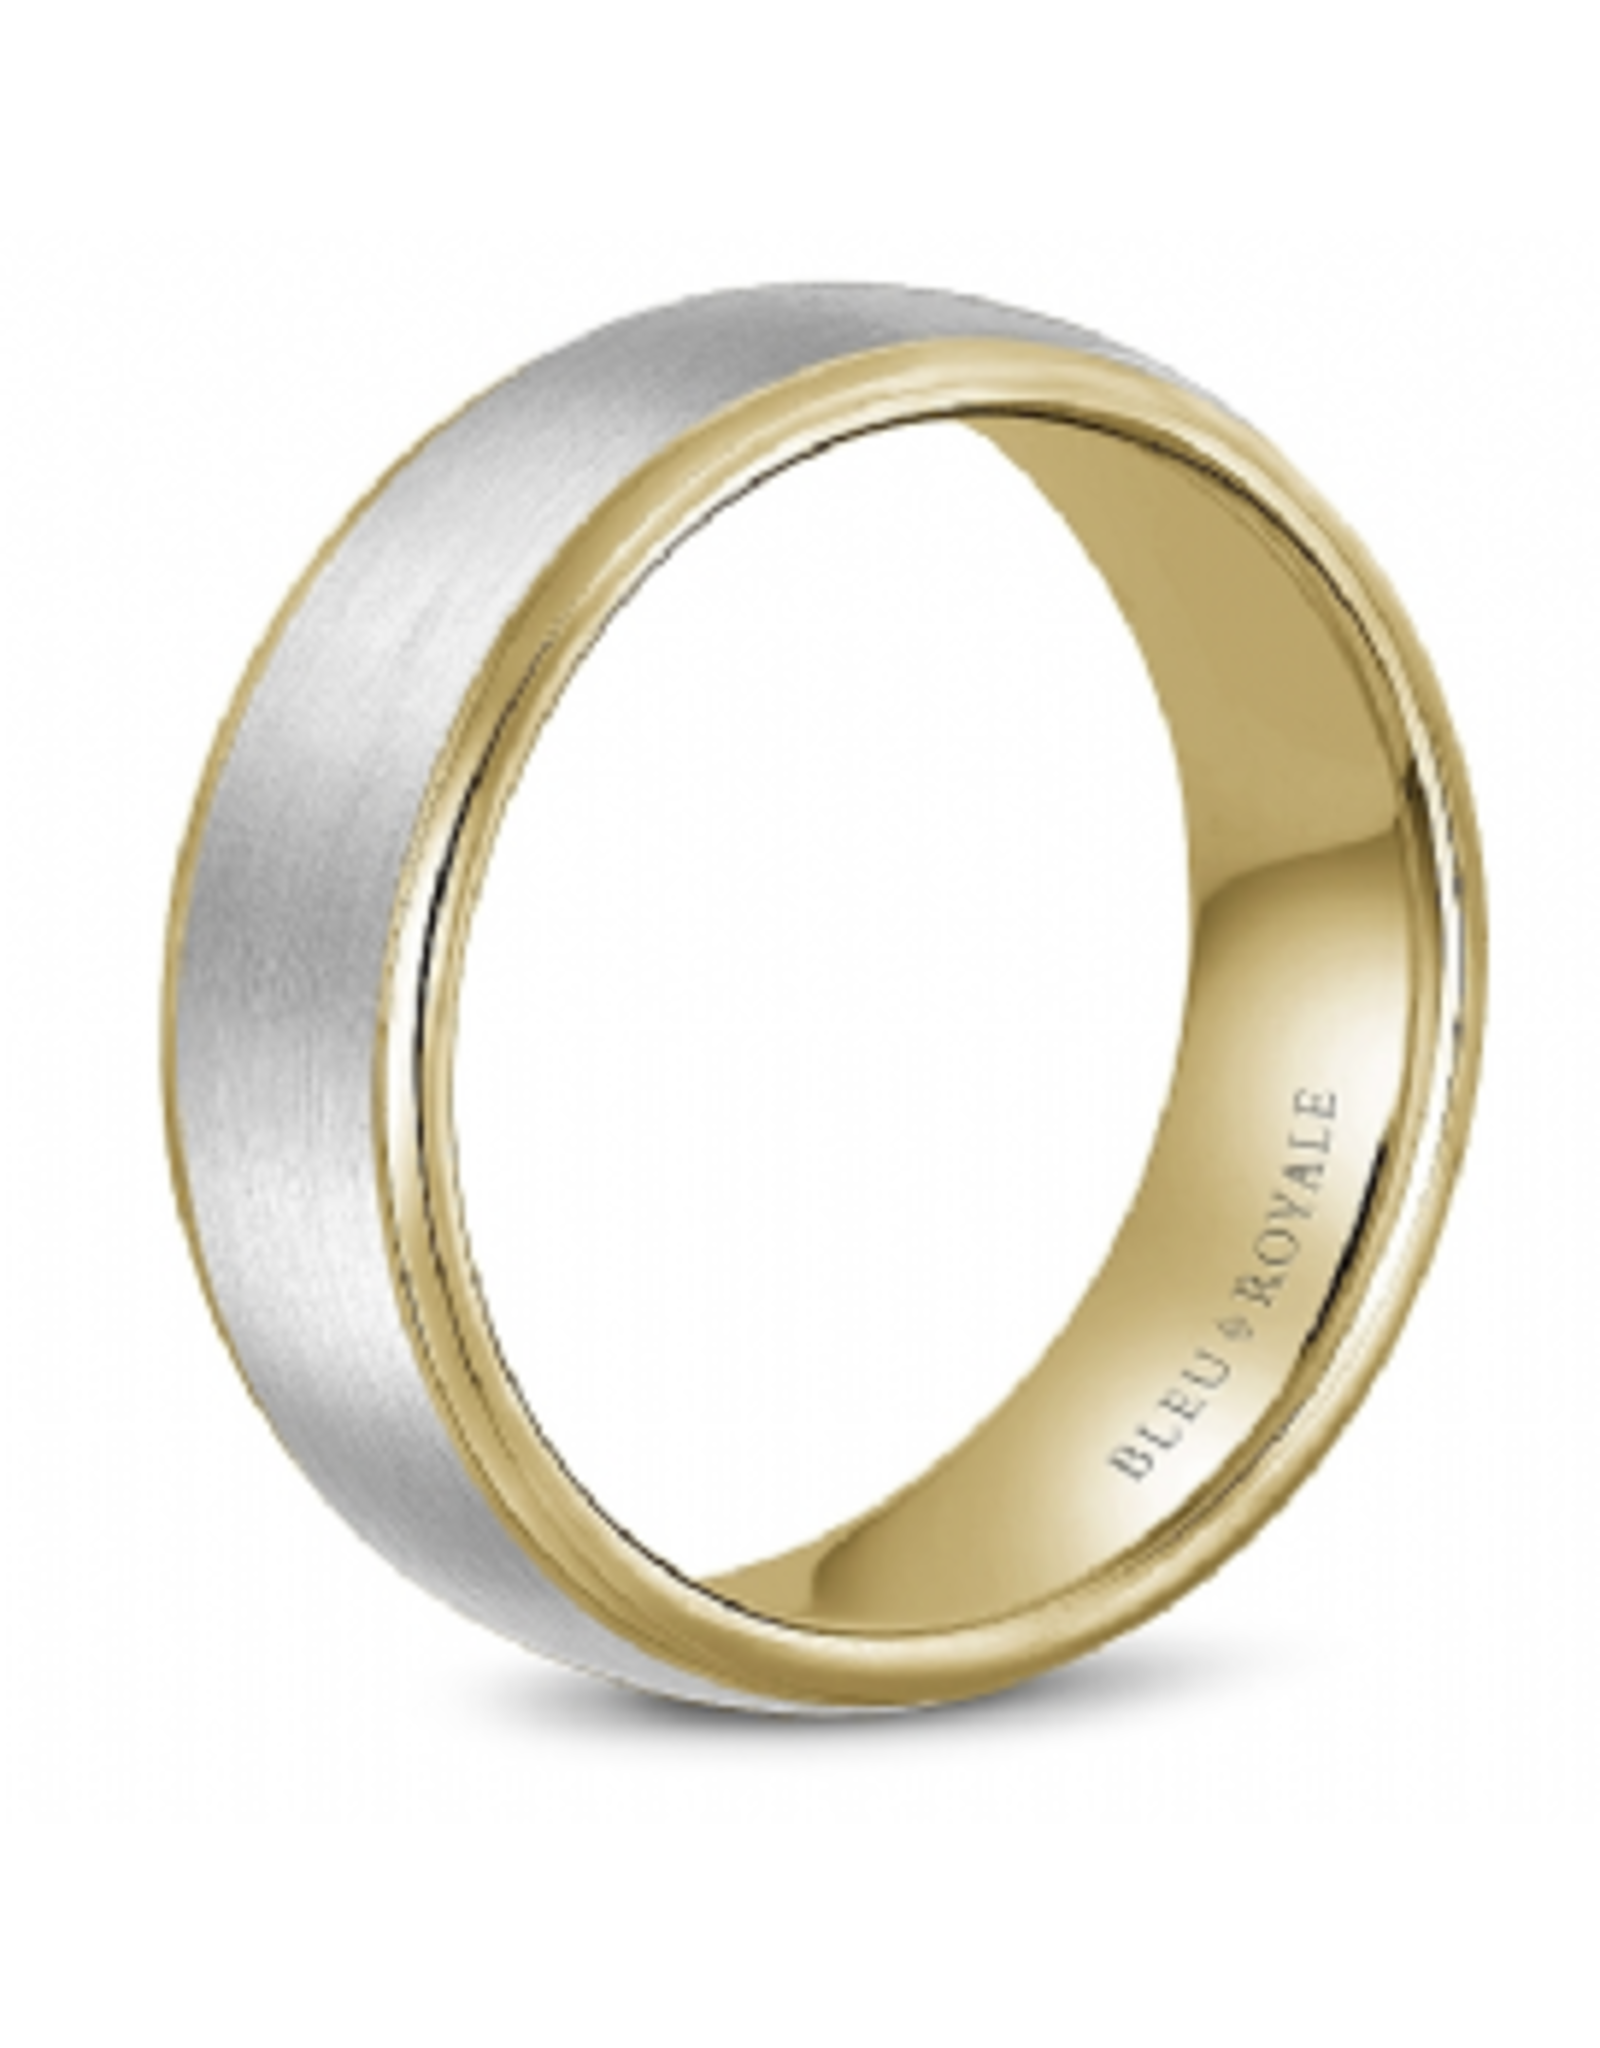 14K White Gold & Yellow Gold Band with Sandpaper Center & High Polish Edges - 7.5mm